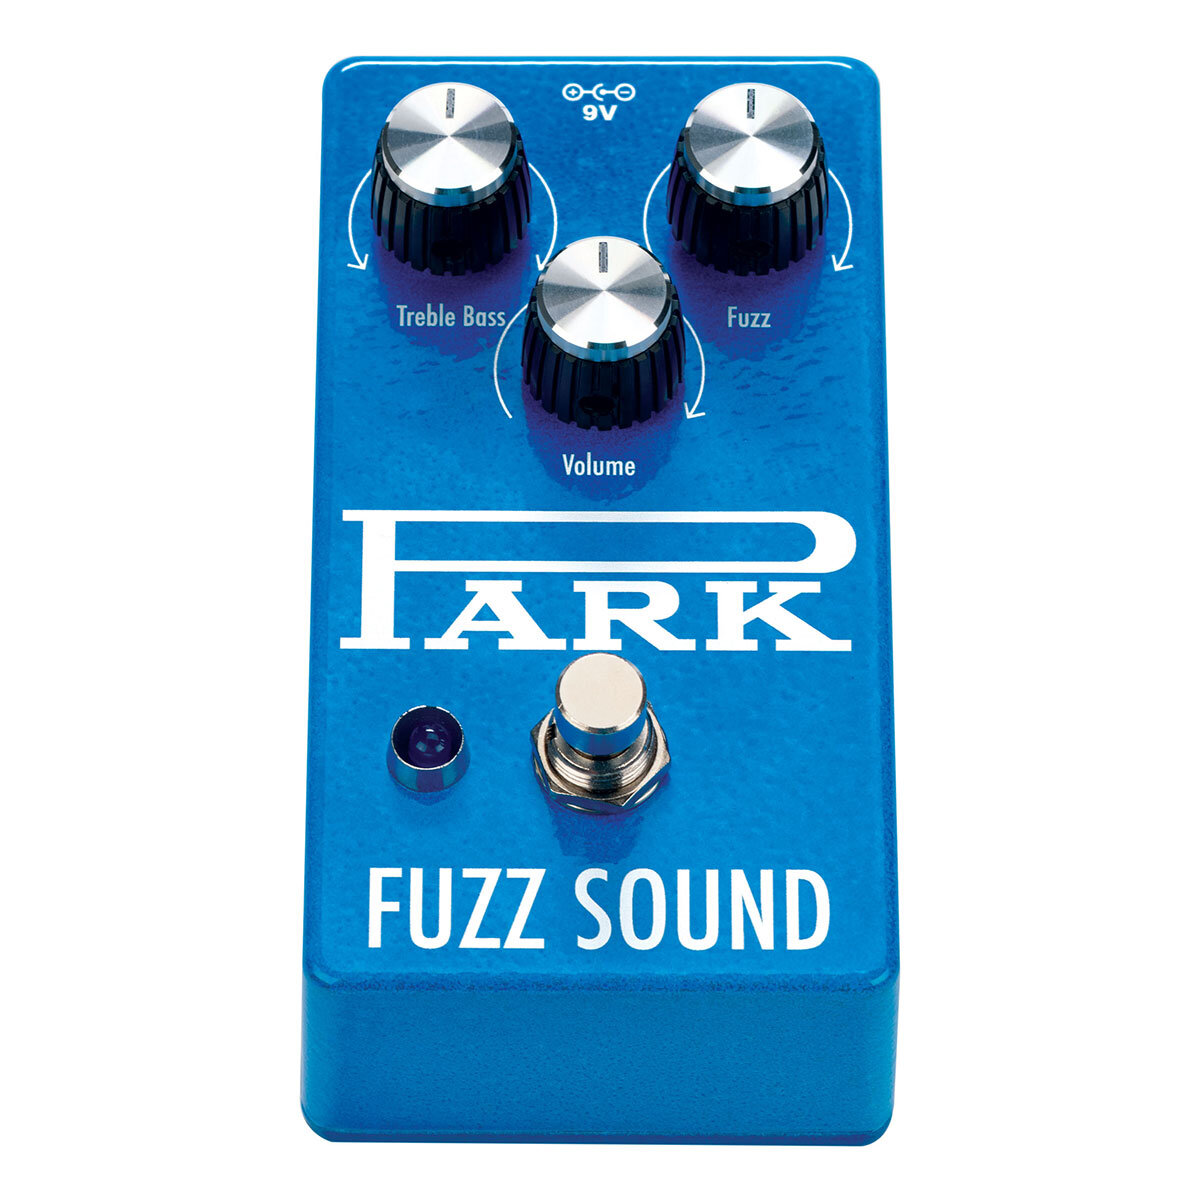 Earthquaker Park Fuzz - Overdrive, distortion & fuzz effect pedal - Variation 1